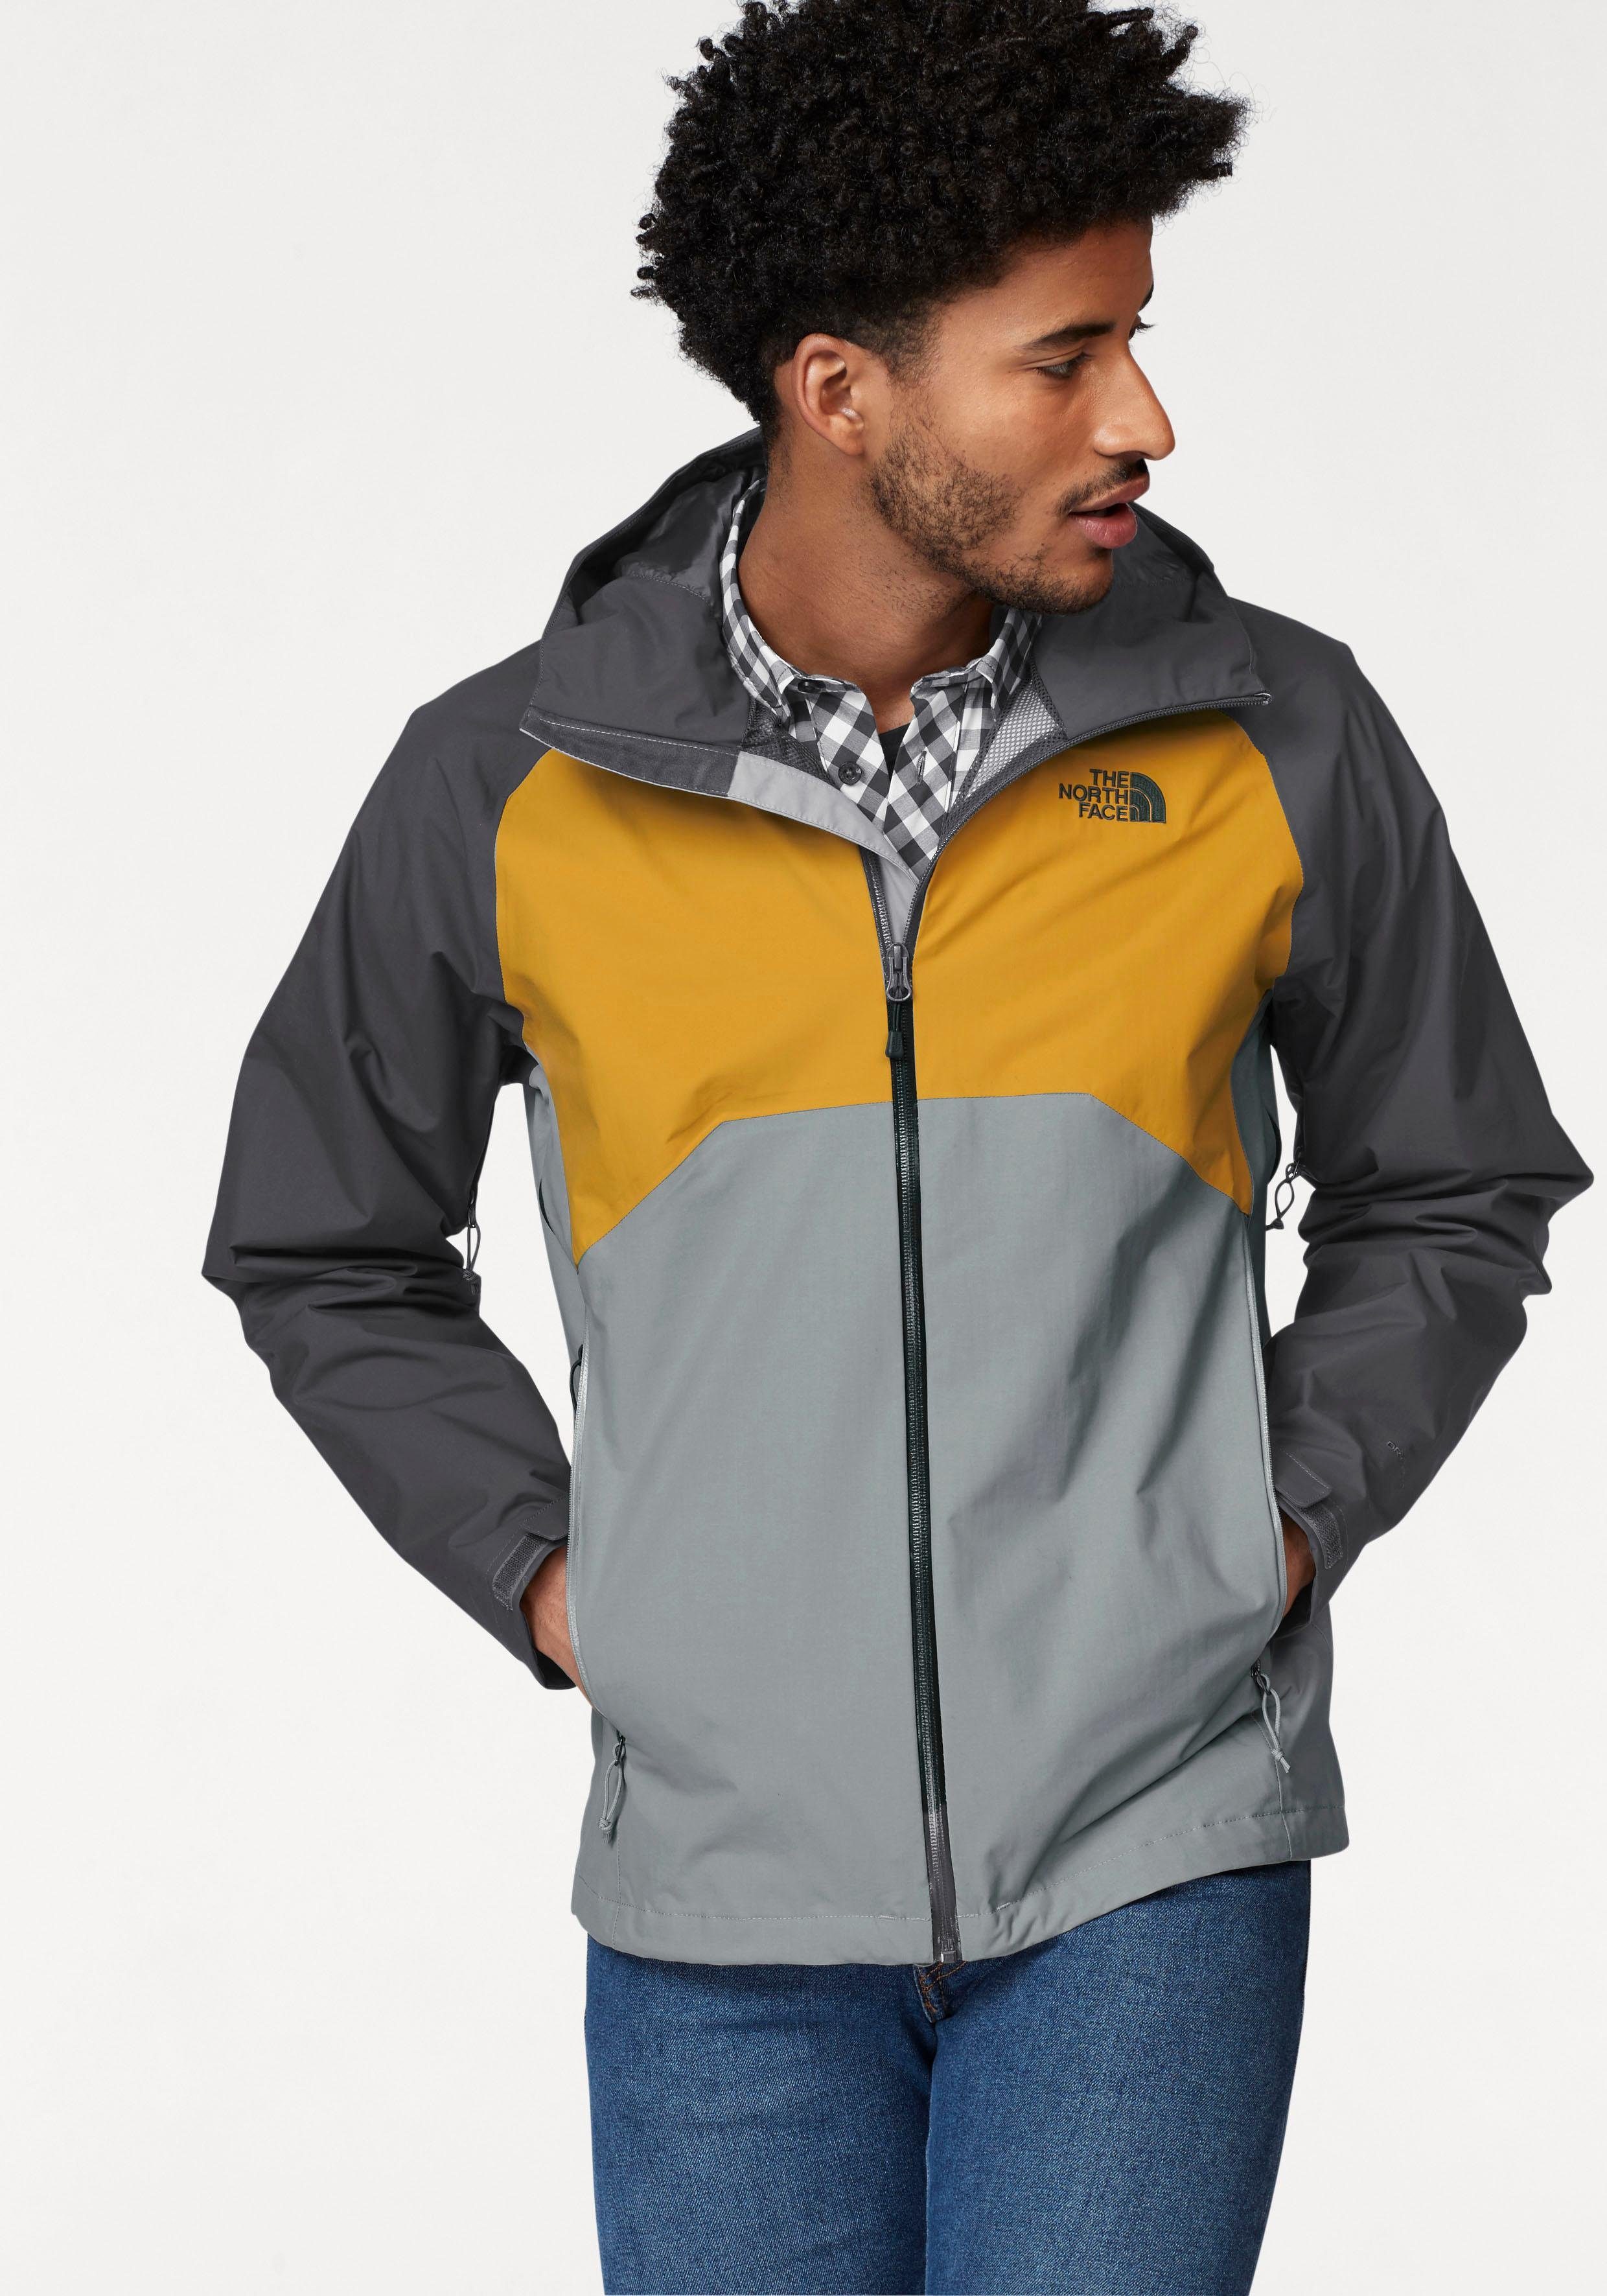 Otto - The North Face NU 15% KORTING: The North Face functioneel jack MENs STRATOS